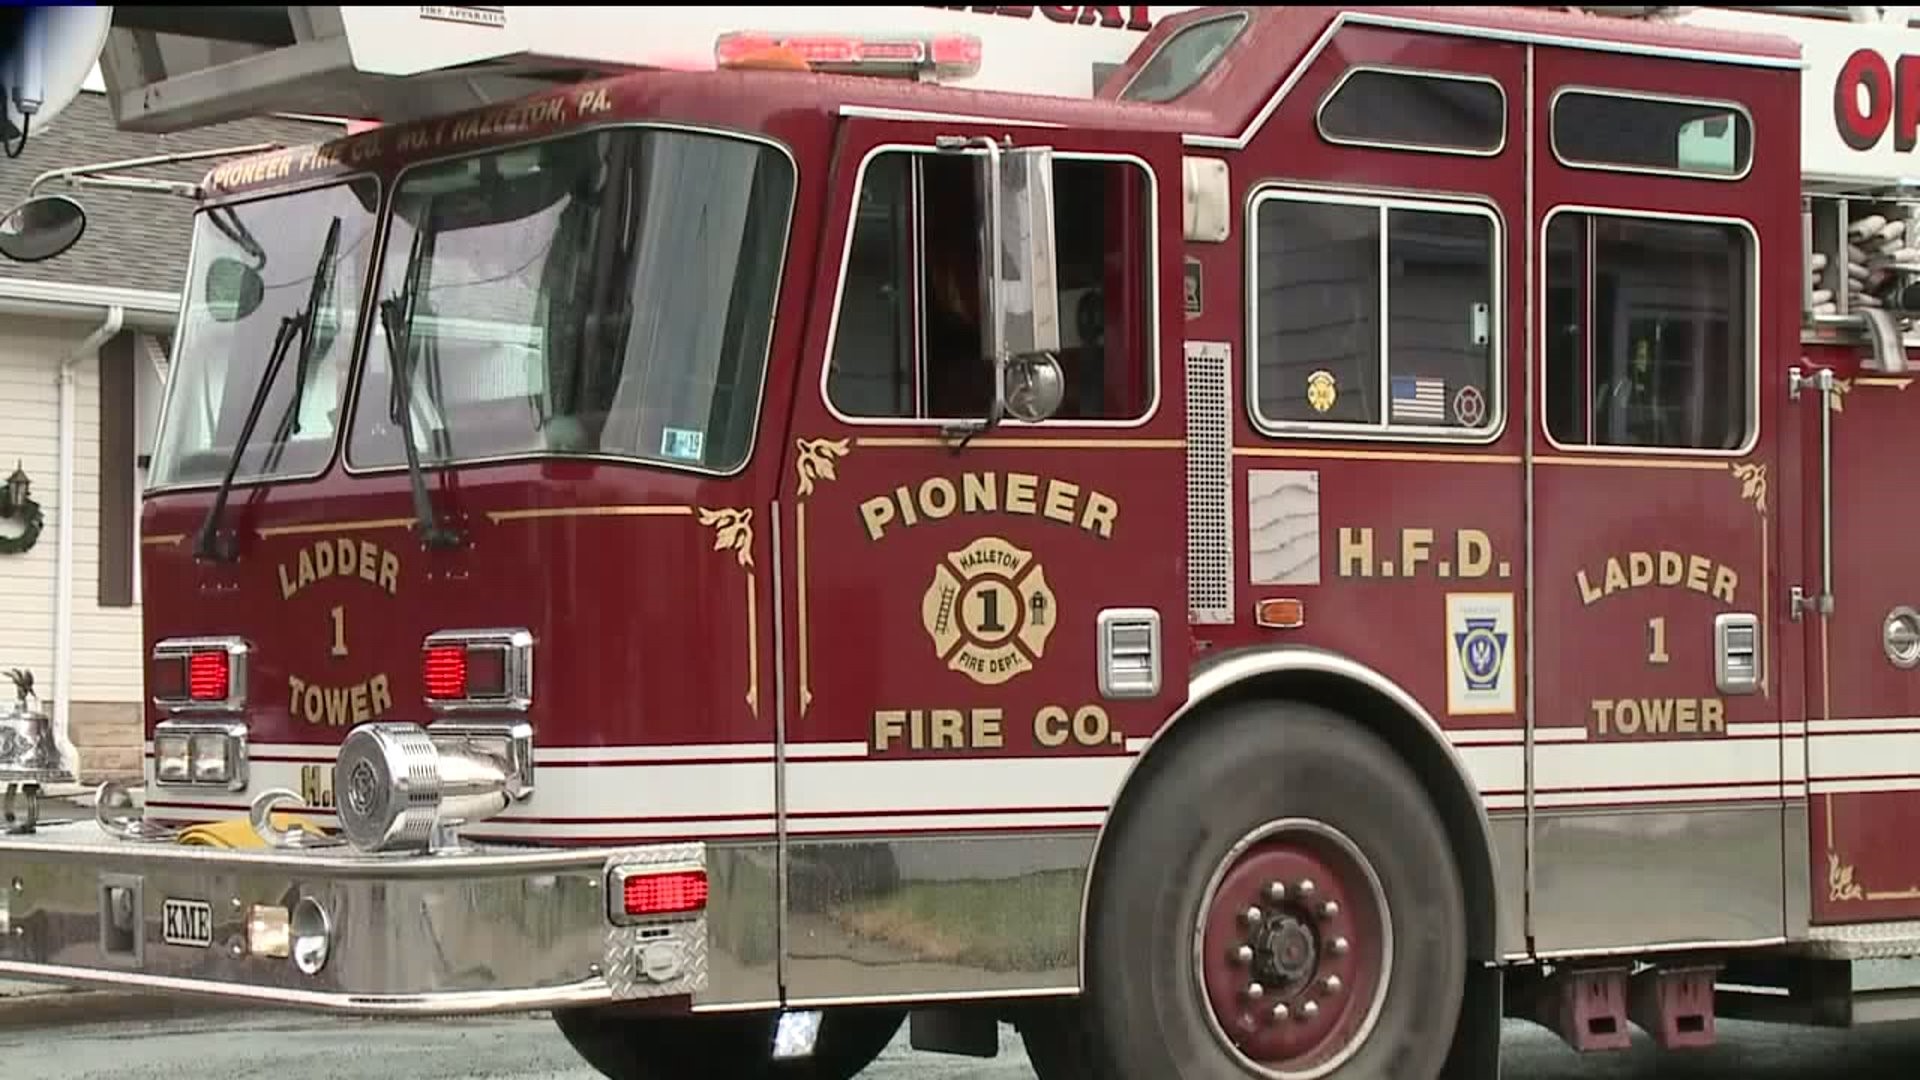 Firefighters Rescue Elderly Woman from Burning Home